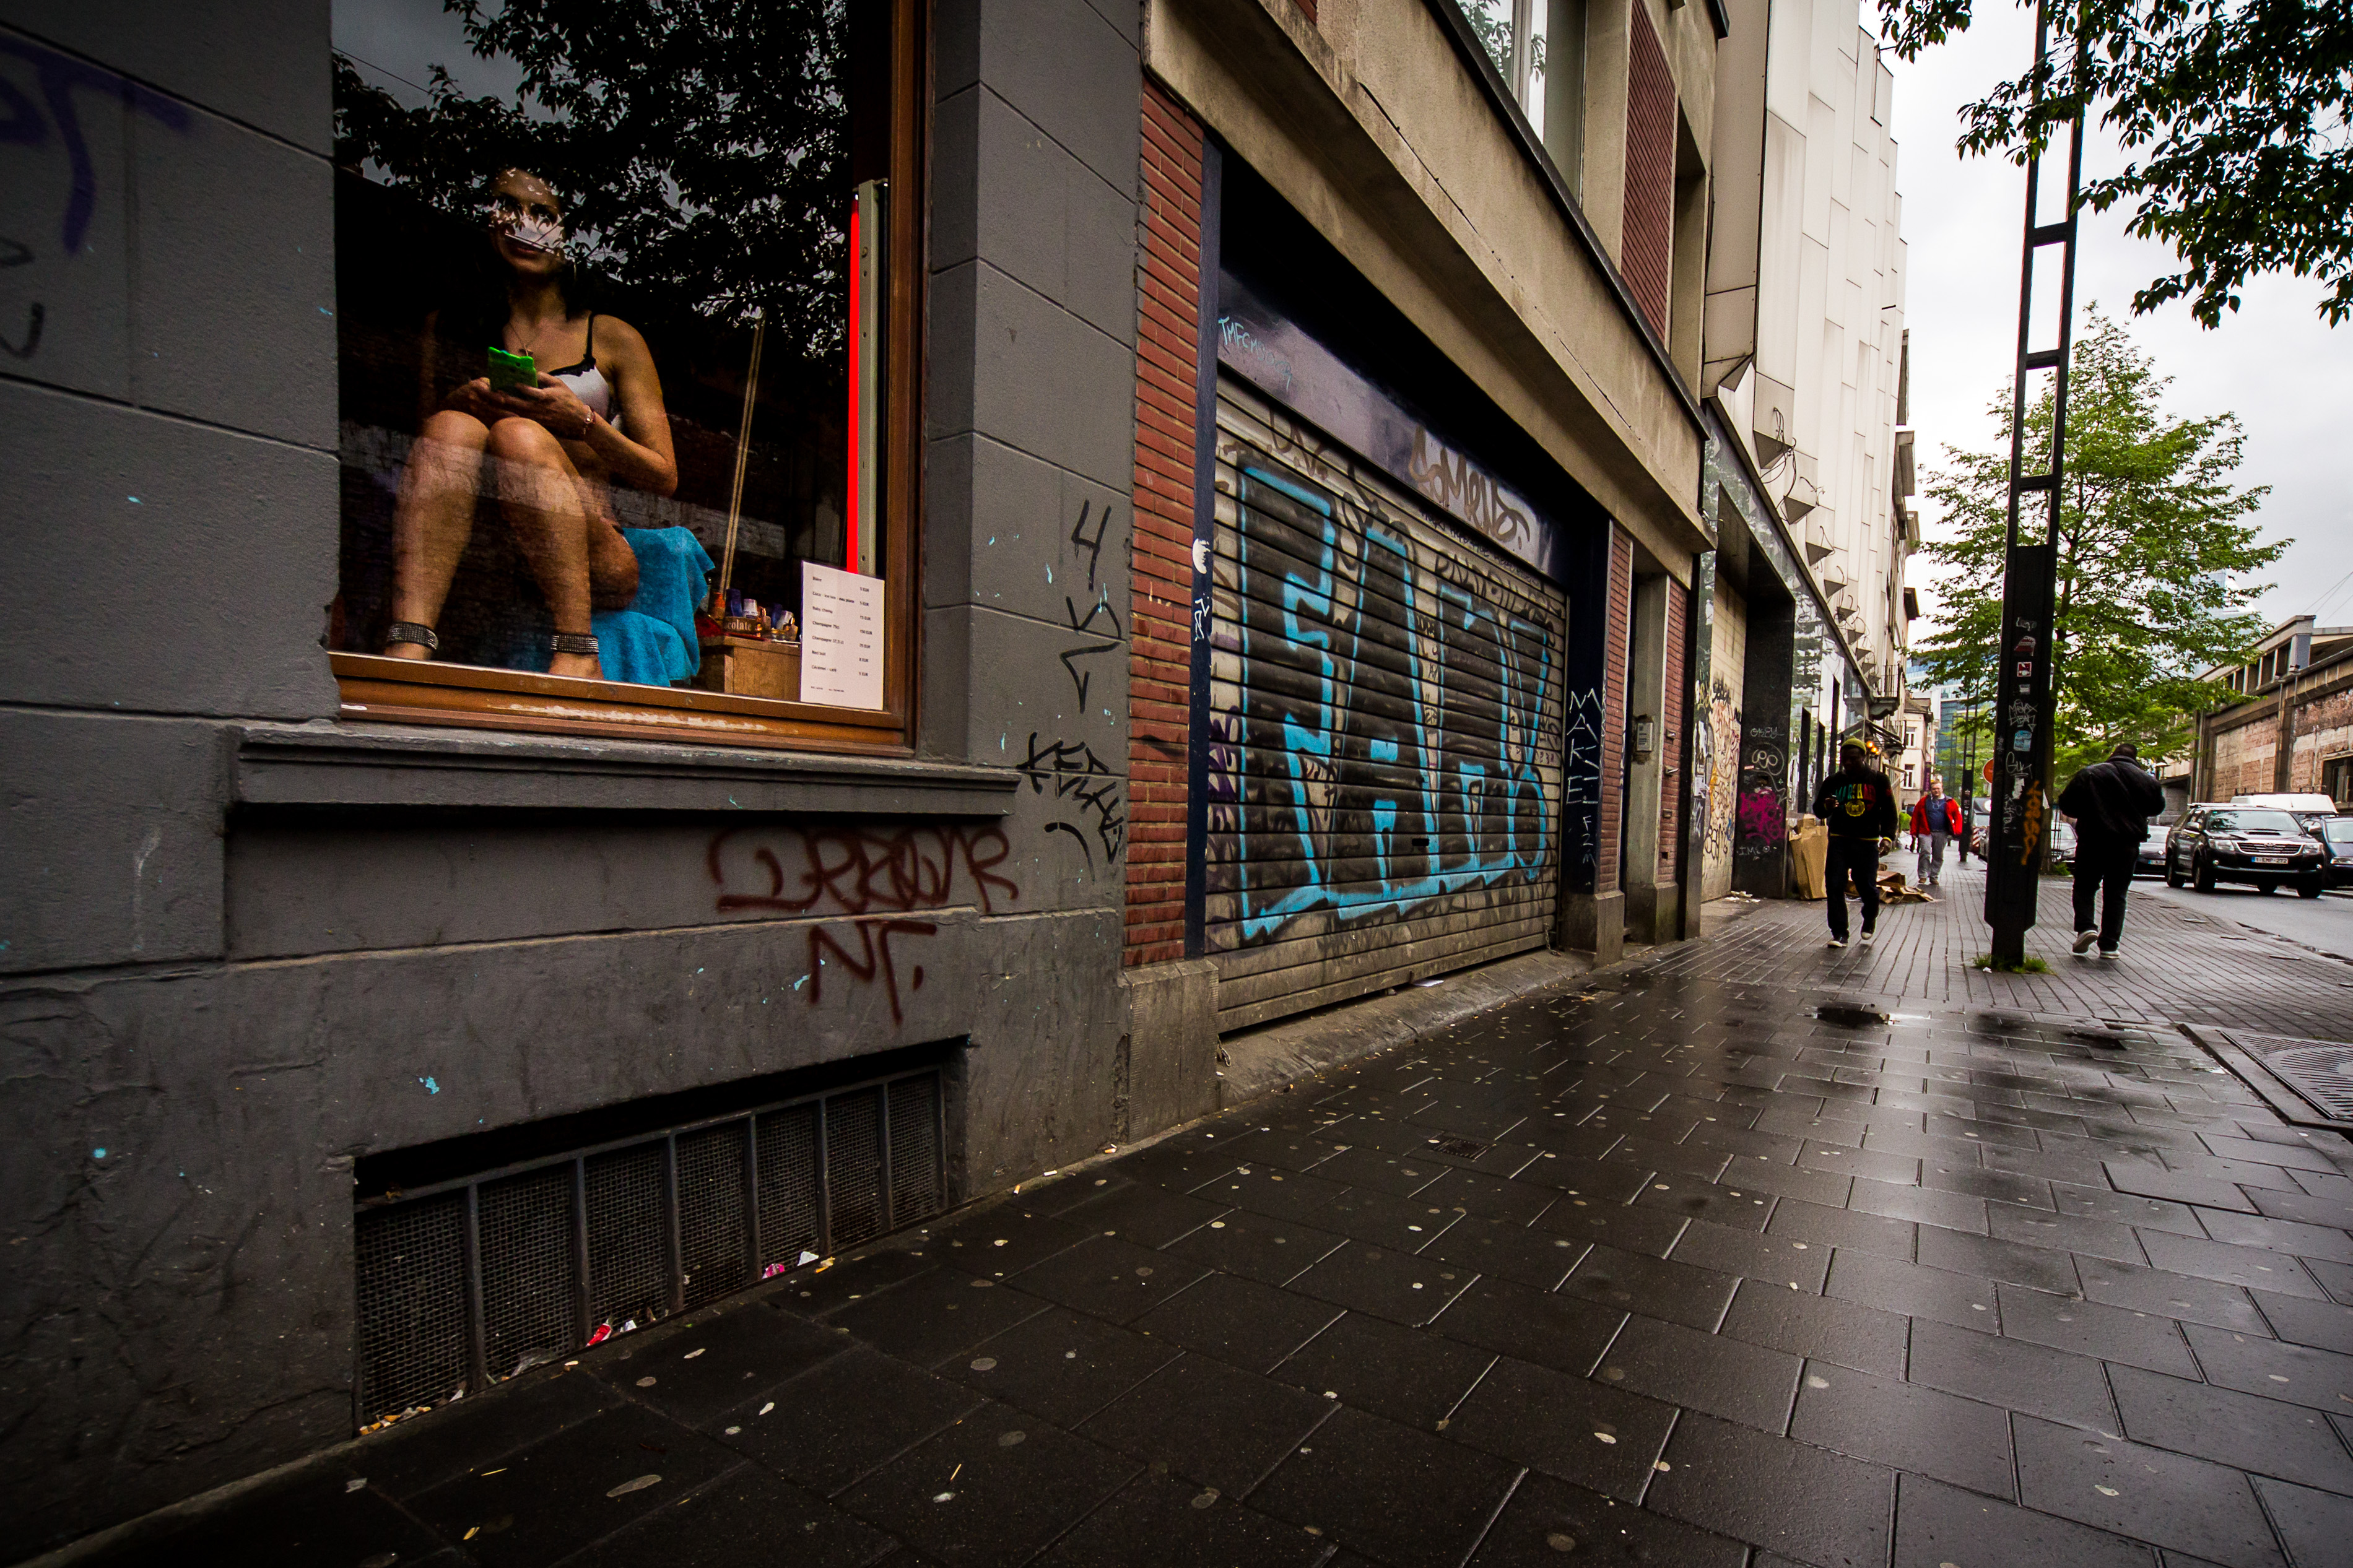 Brussels bans prostitution again in bid to curb Covid-19 infection rate